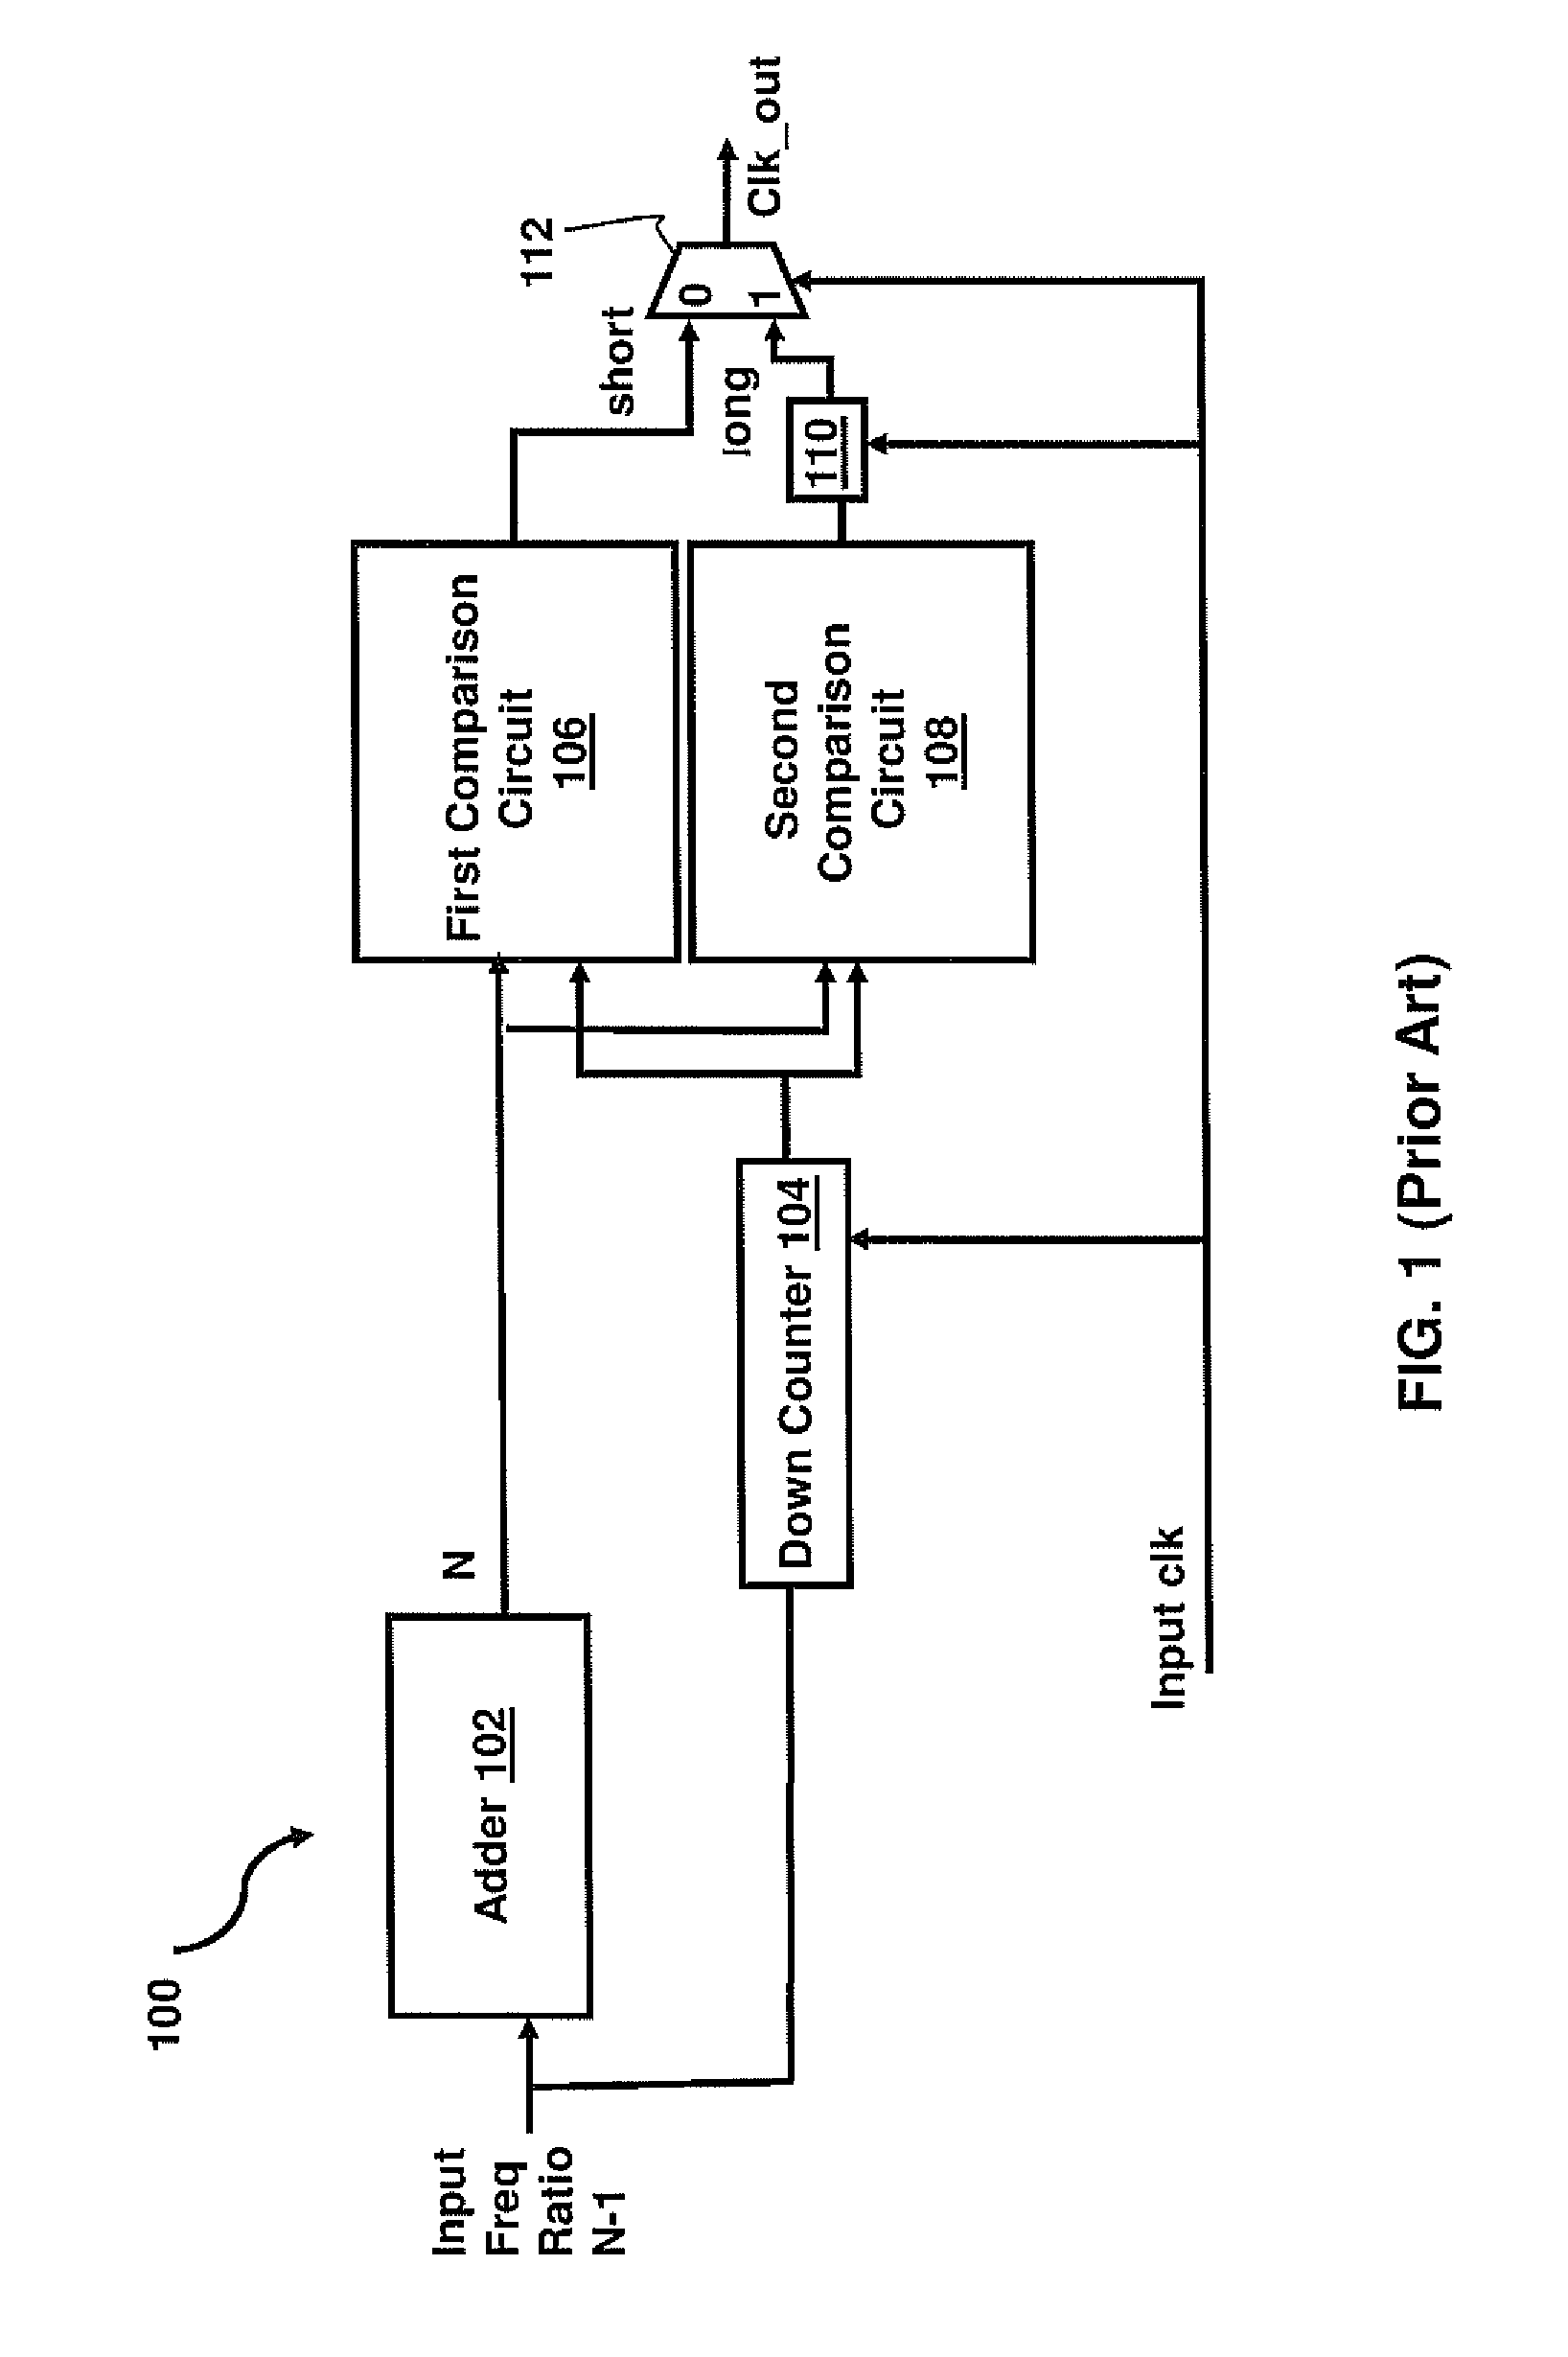 Programmable synchronous clock divider